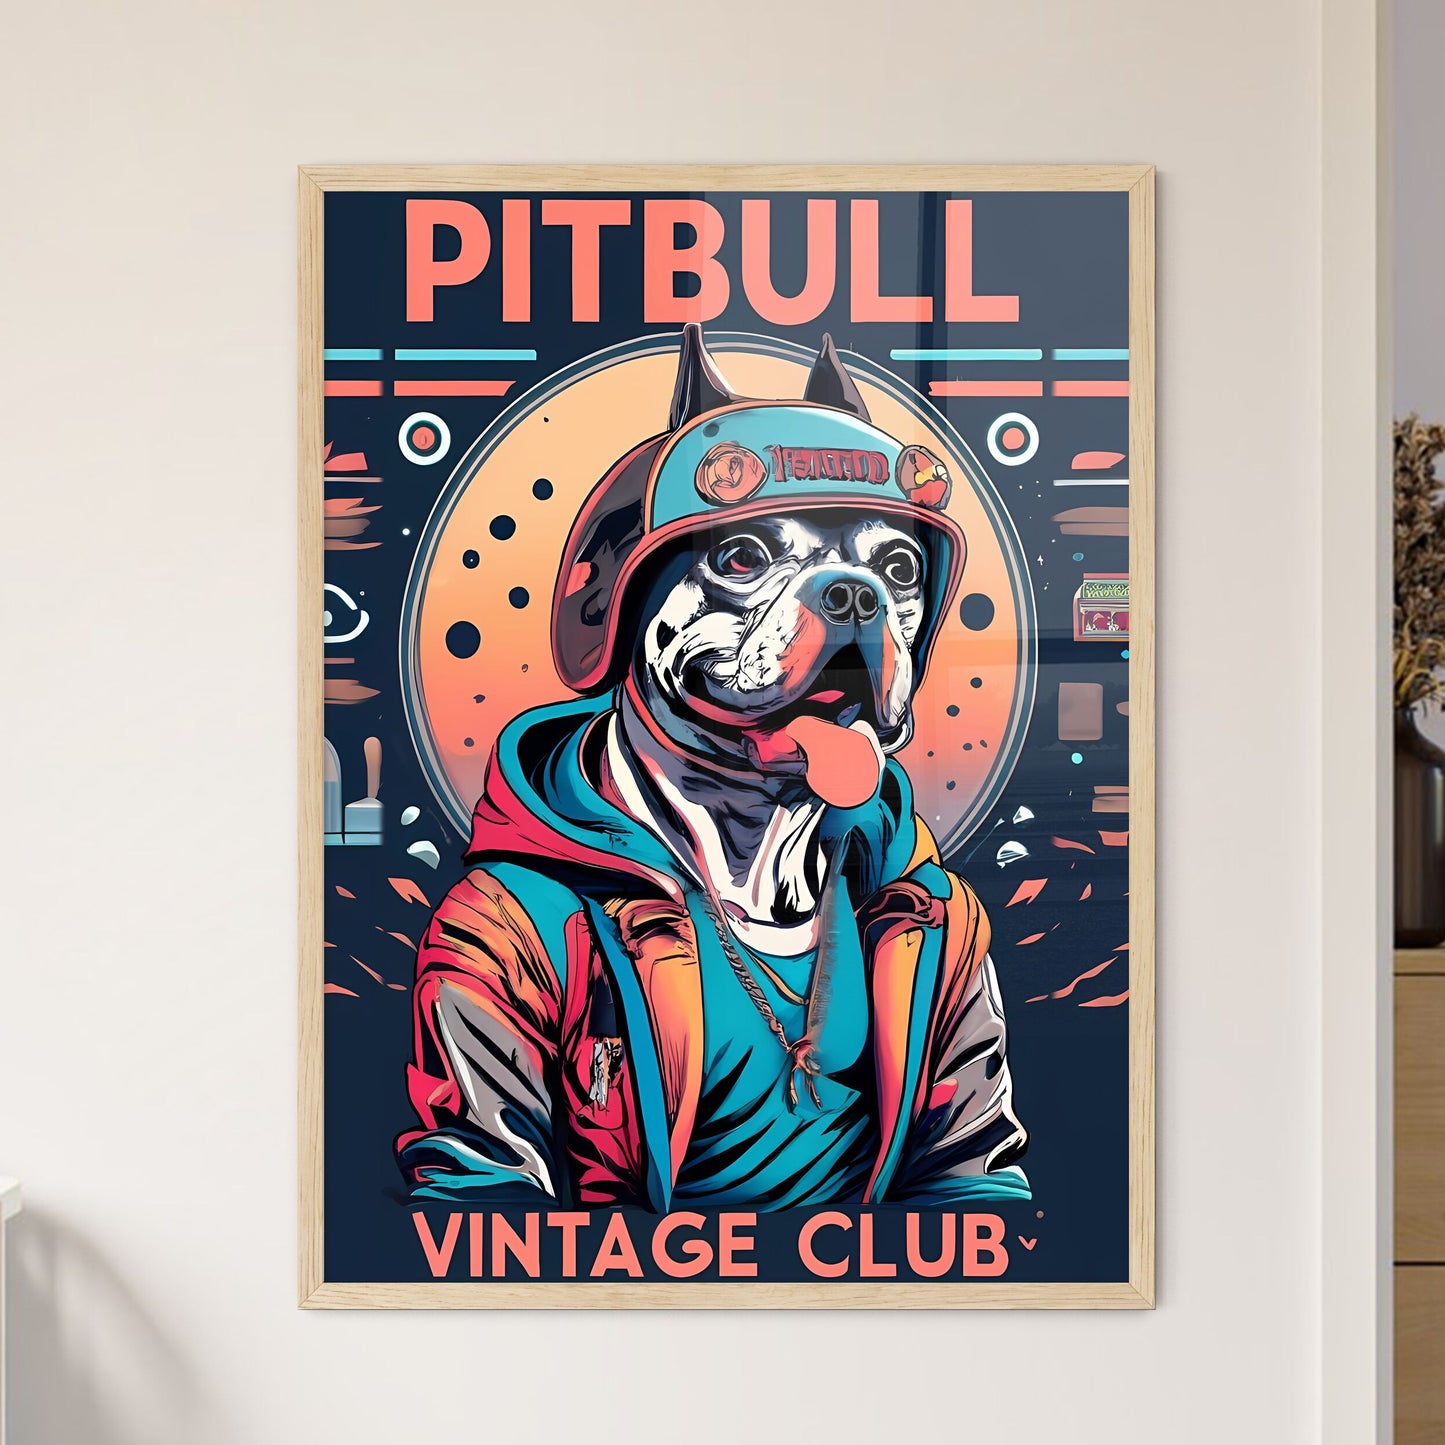 Pitbull Vintage Club - A Dog Wearing A Hat And Jacket Default Title